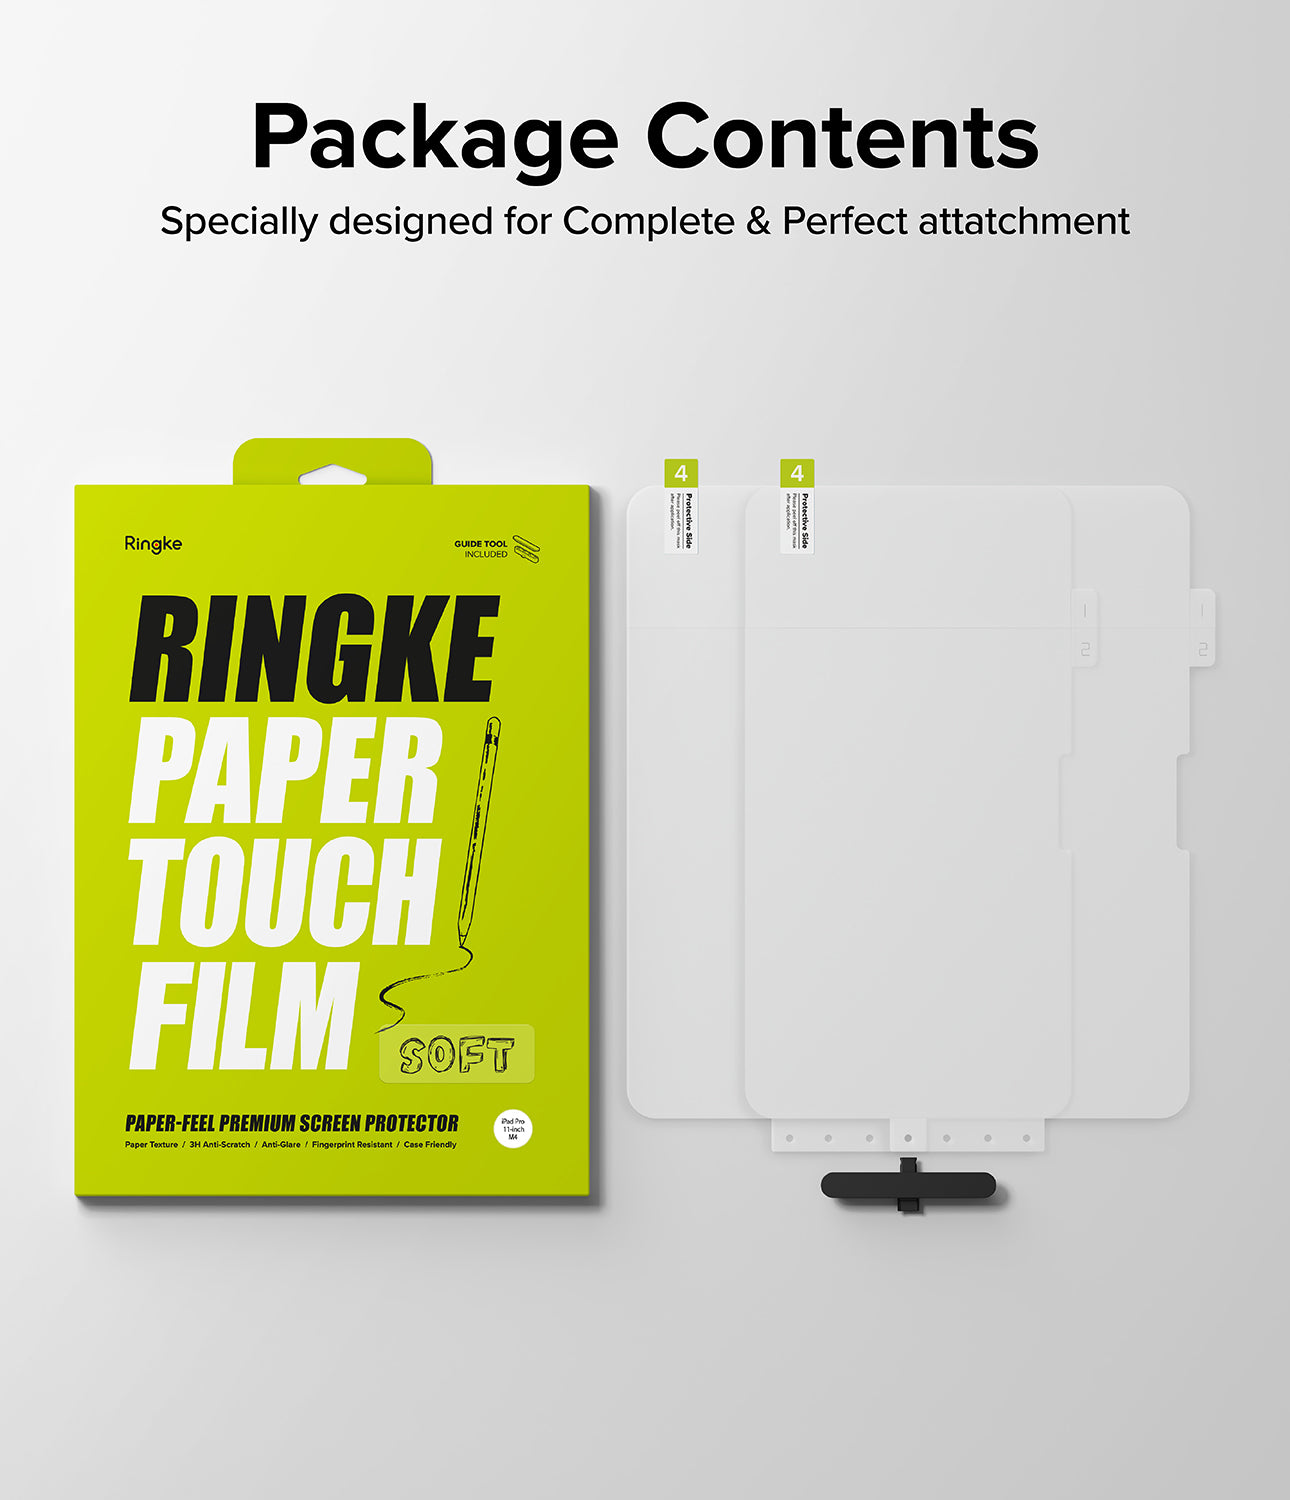 iPad Pro 11" (M4) Screen Protector | Paper Touch Film - Soft - Package Contents. Specially designed for Complete and Perfect attachment.